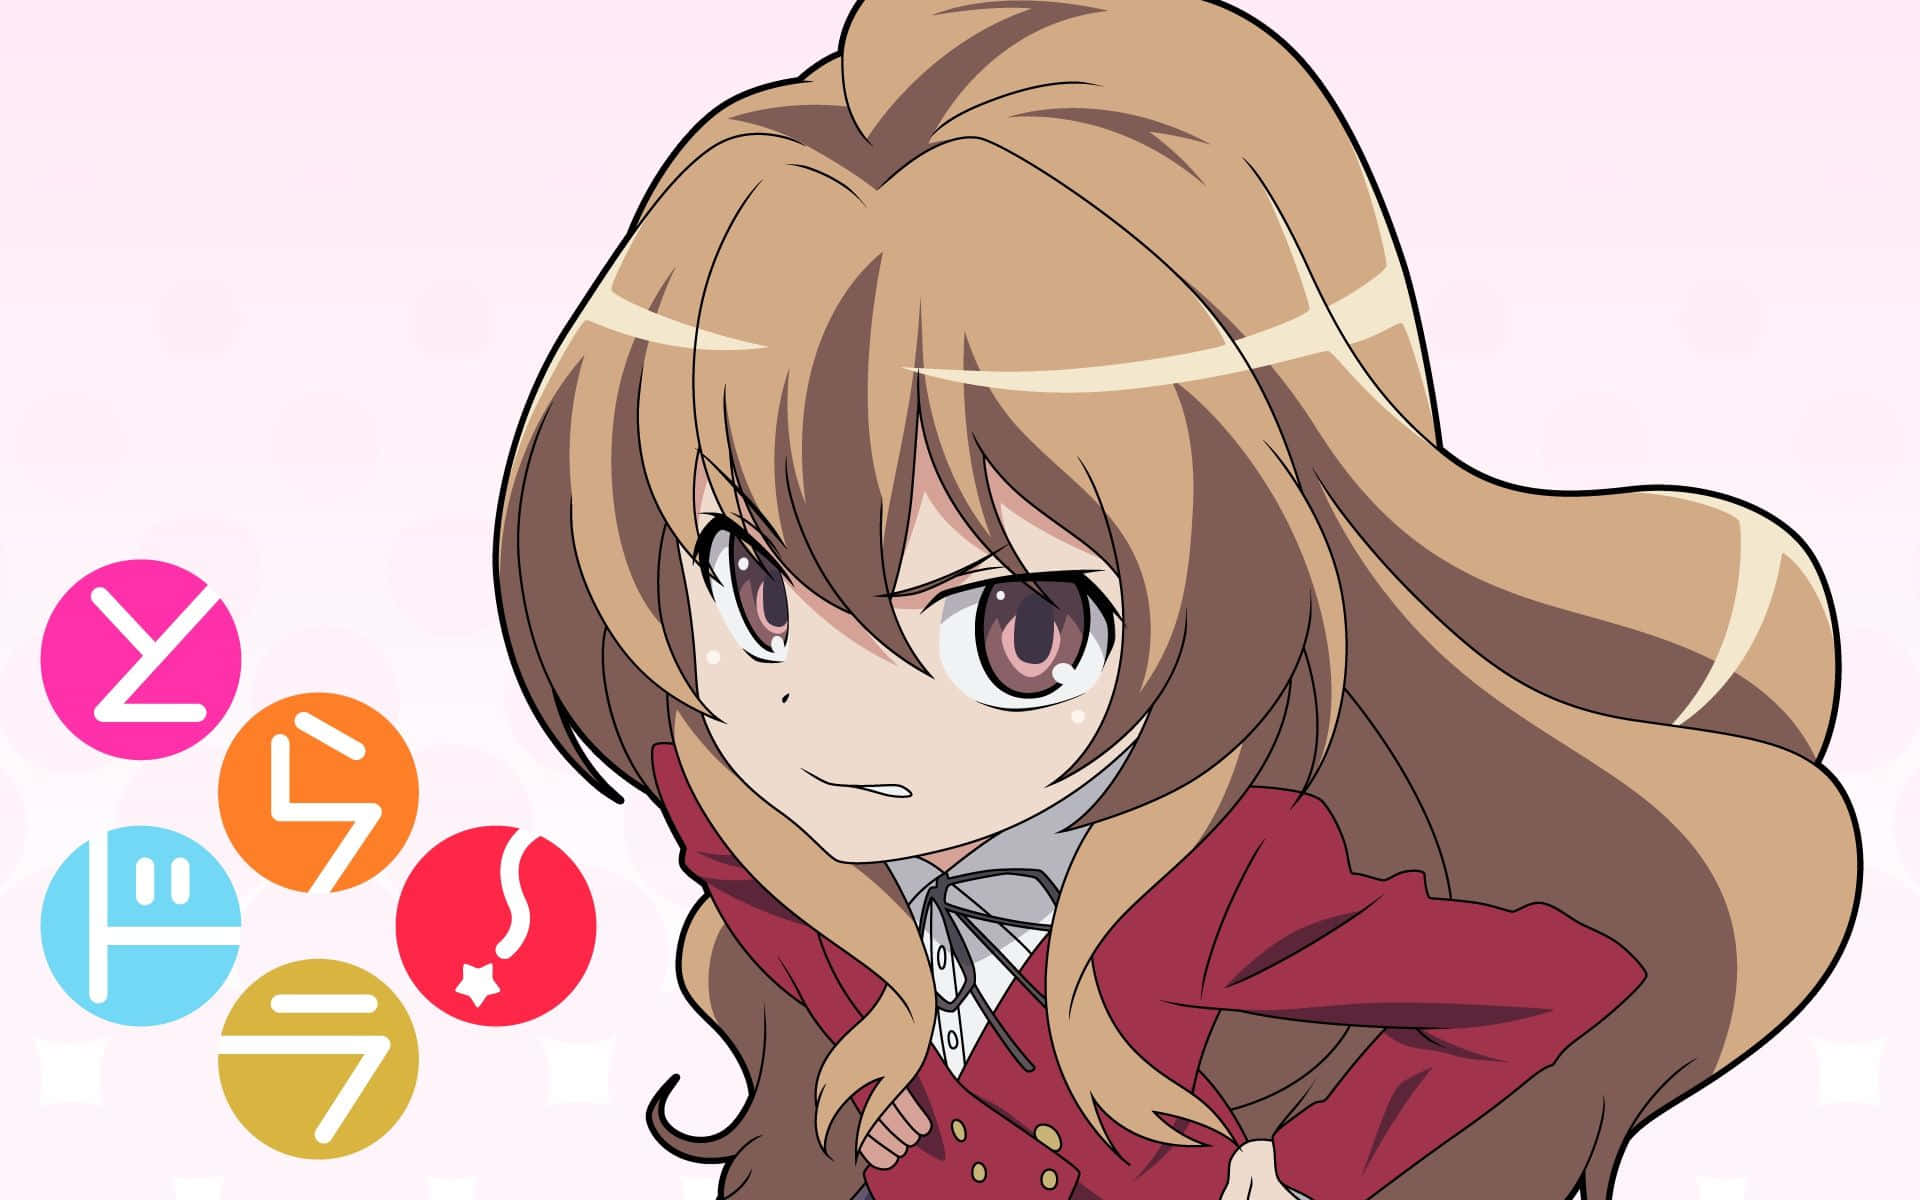 Animeflicka Taiga Aisaka Arg. (this Is A Direct Translation, But It Would Be More Natural In Swedish To Say 